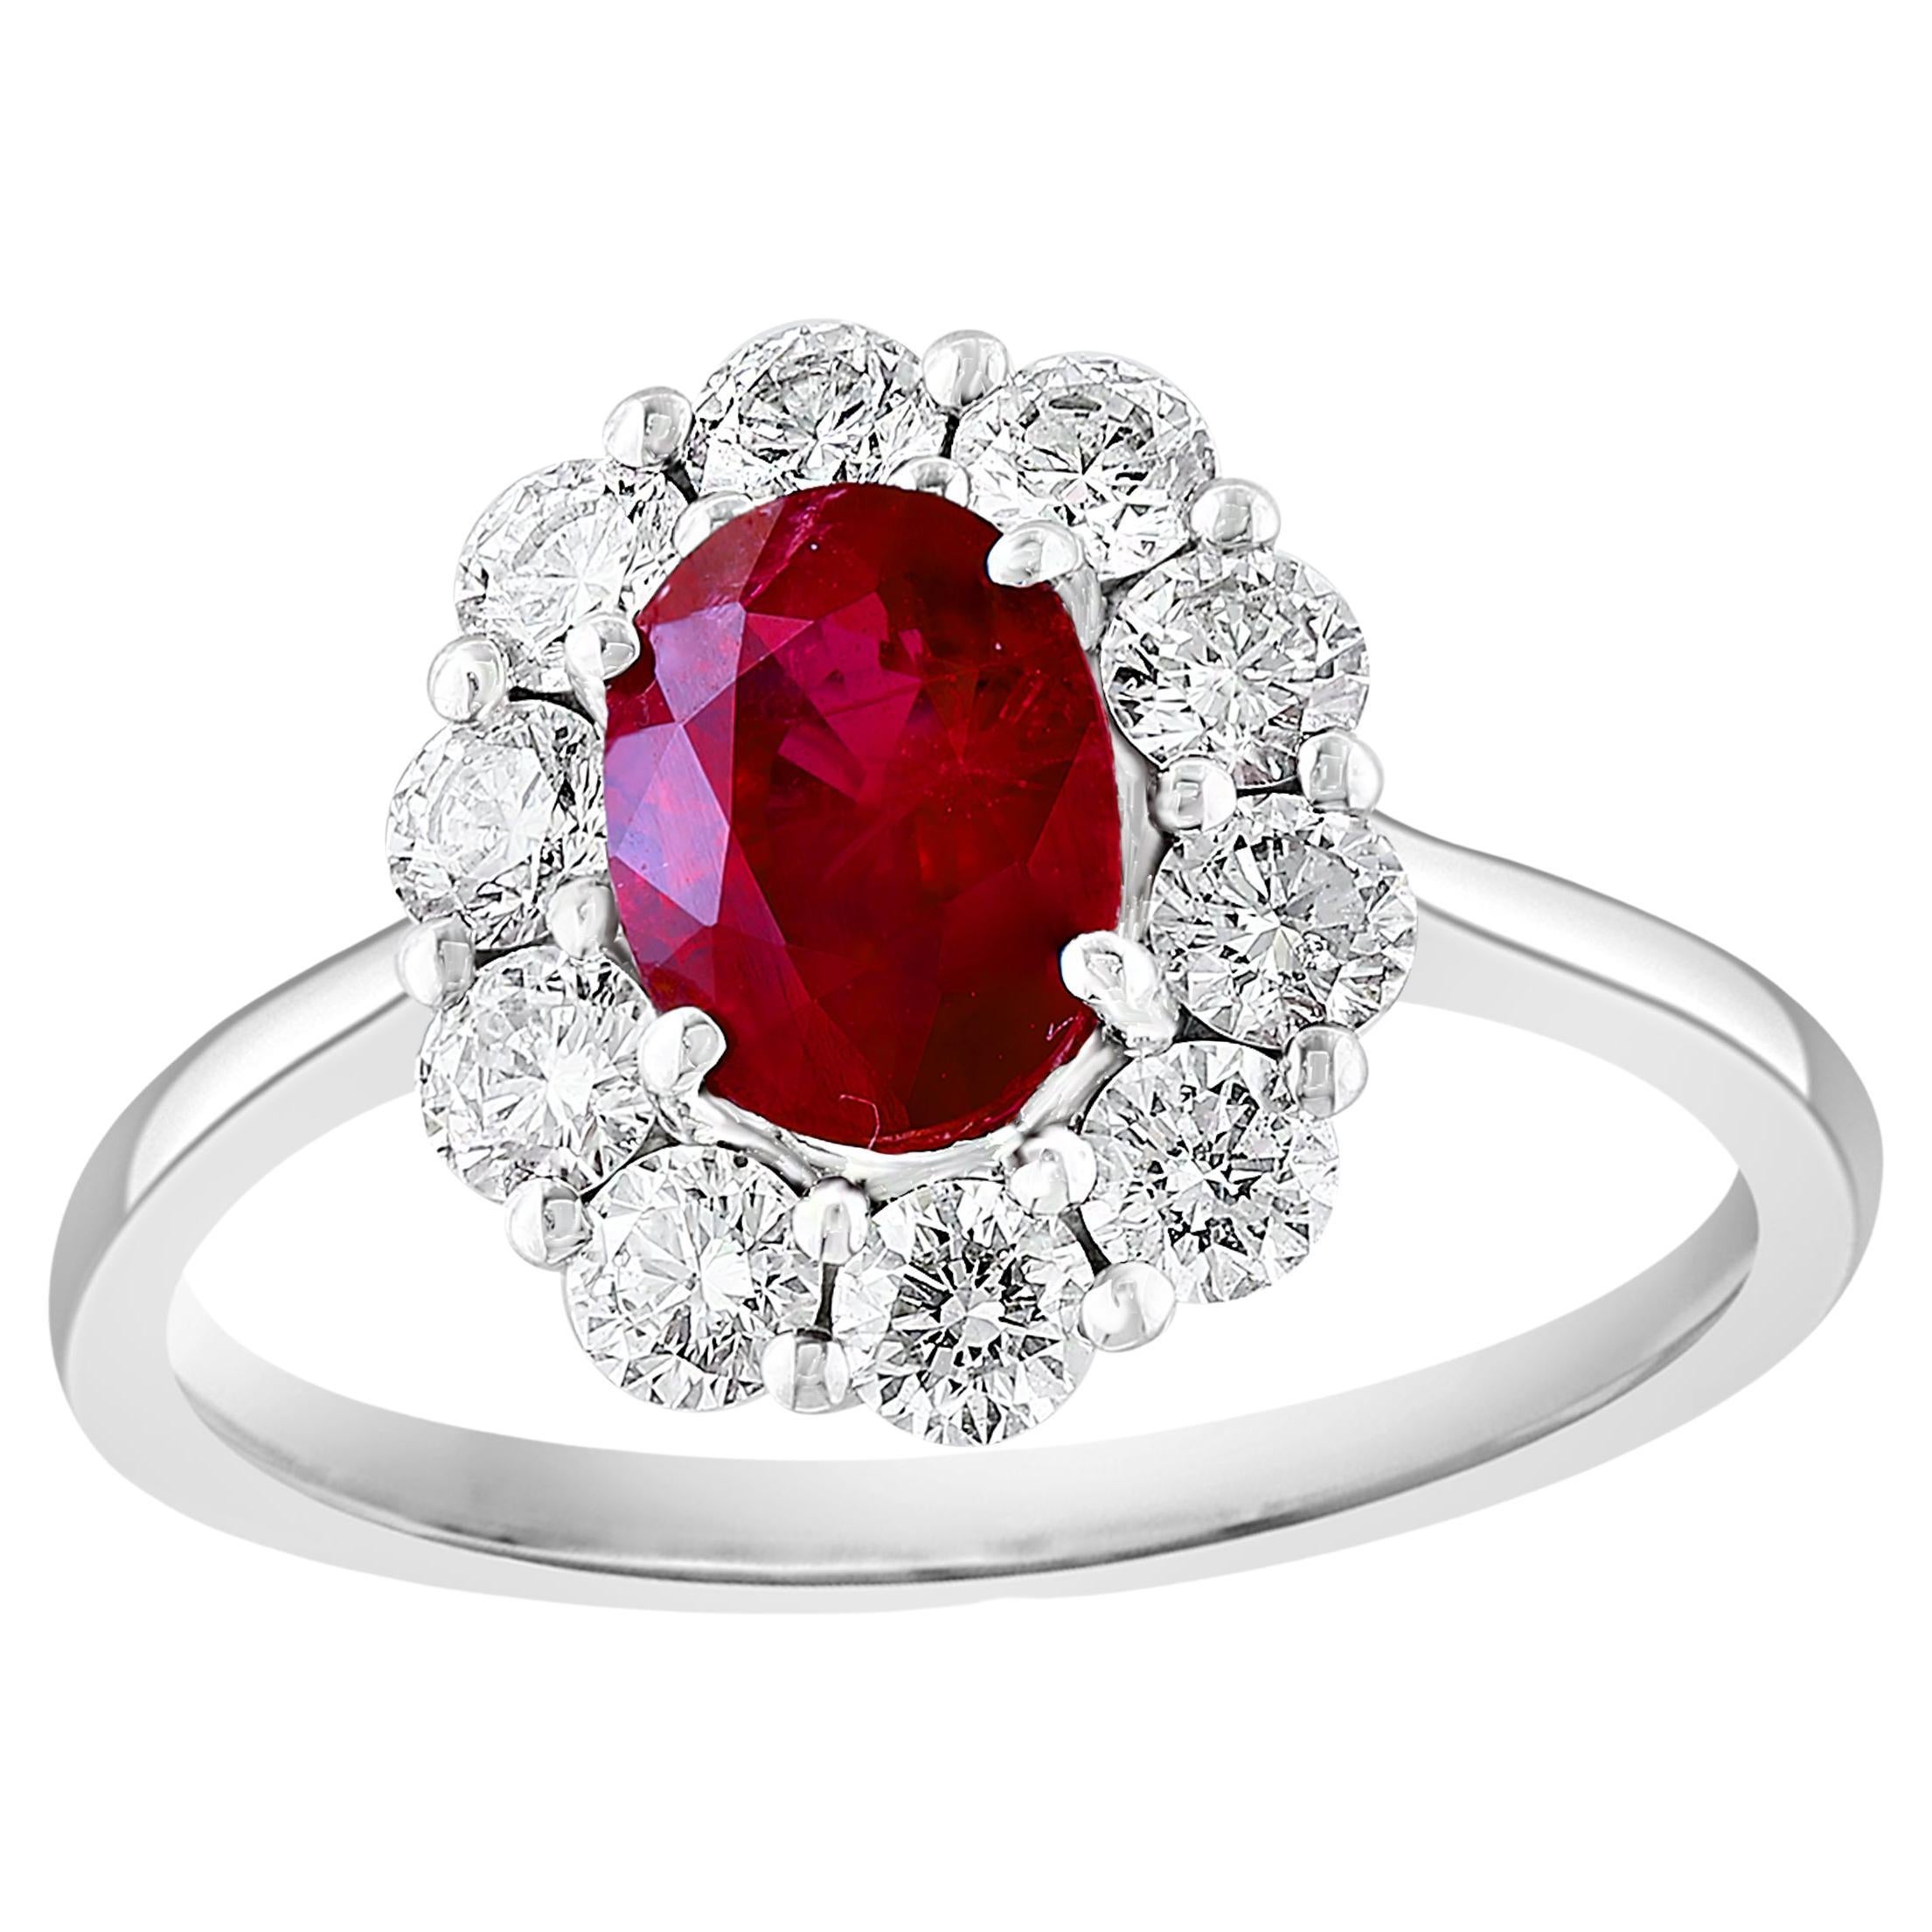 0.92 Carat Oval Cut Ruby and Diamond Ring in 18k White Gold For Sale